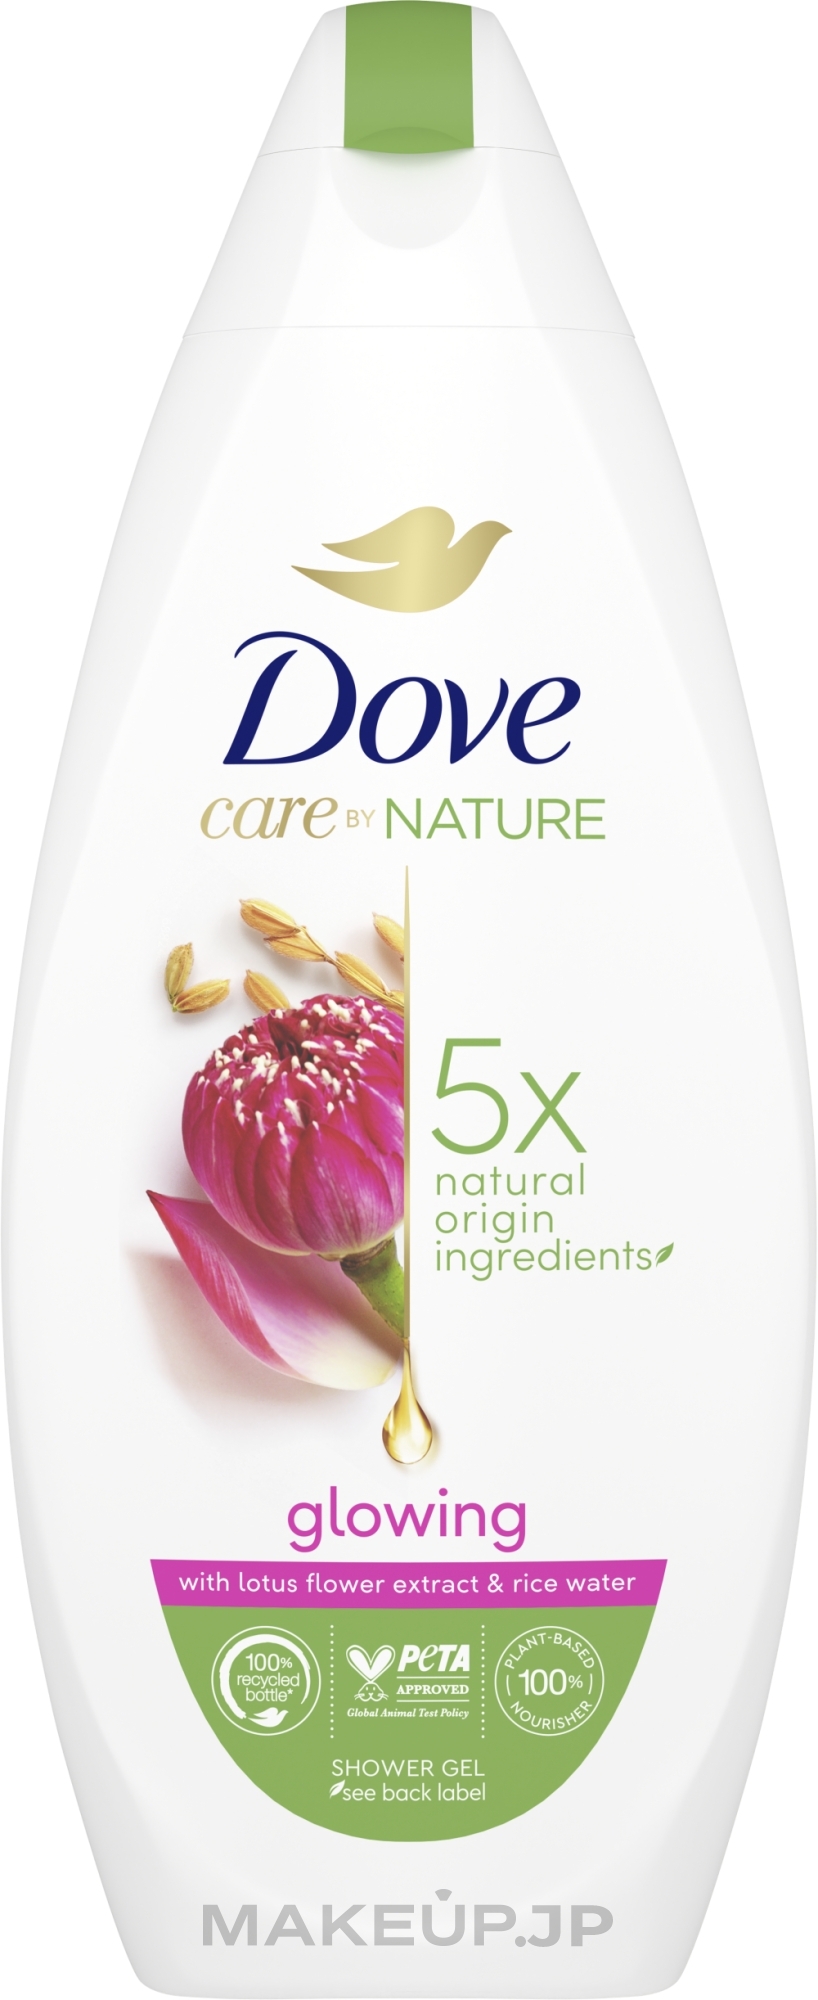 Shower Gel with Lotus Flower & Rice Water Extract - Dove Care By Nature Glowing Shower Gel — photo 225 ml